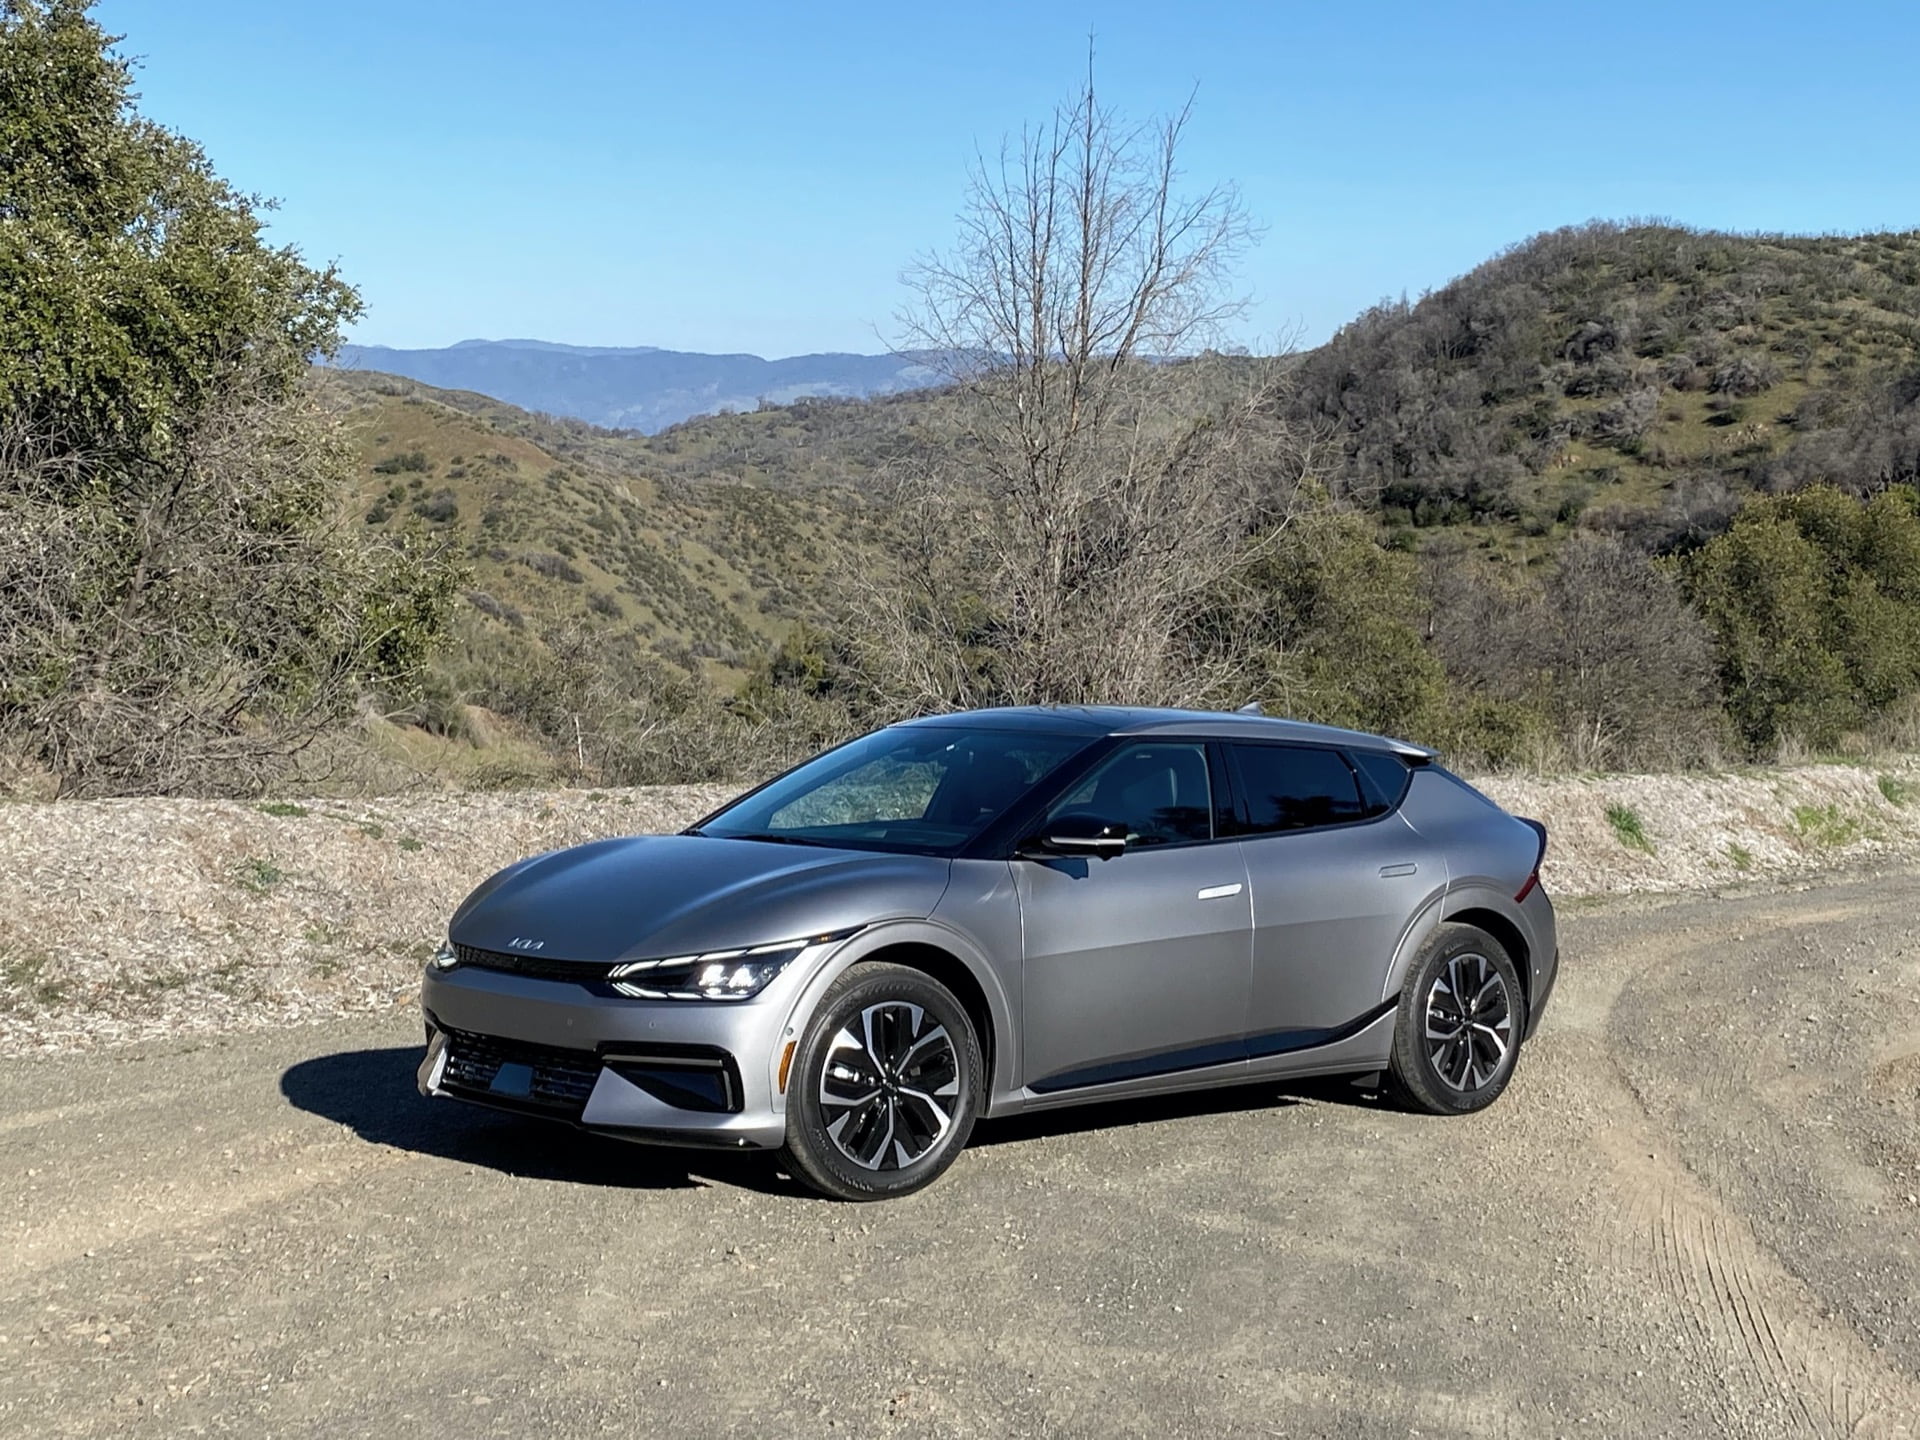 First Drive Review: 2022 Kia EV6 electric car is a hoot, and it hits reset for the brand